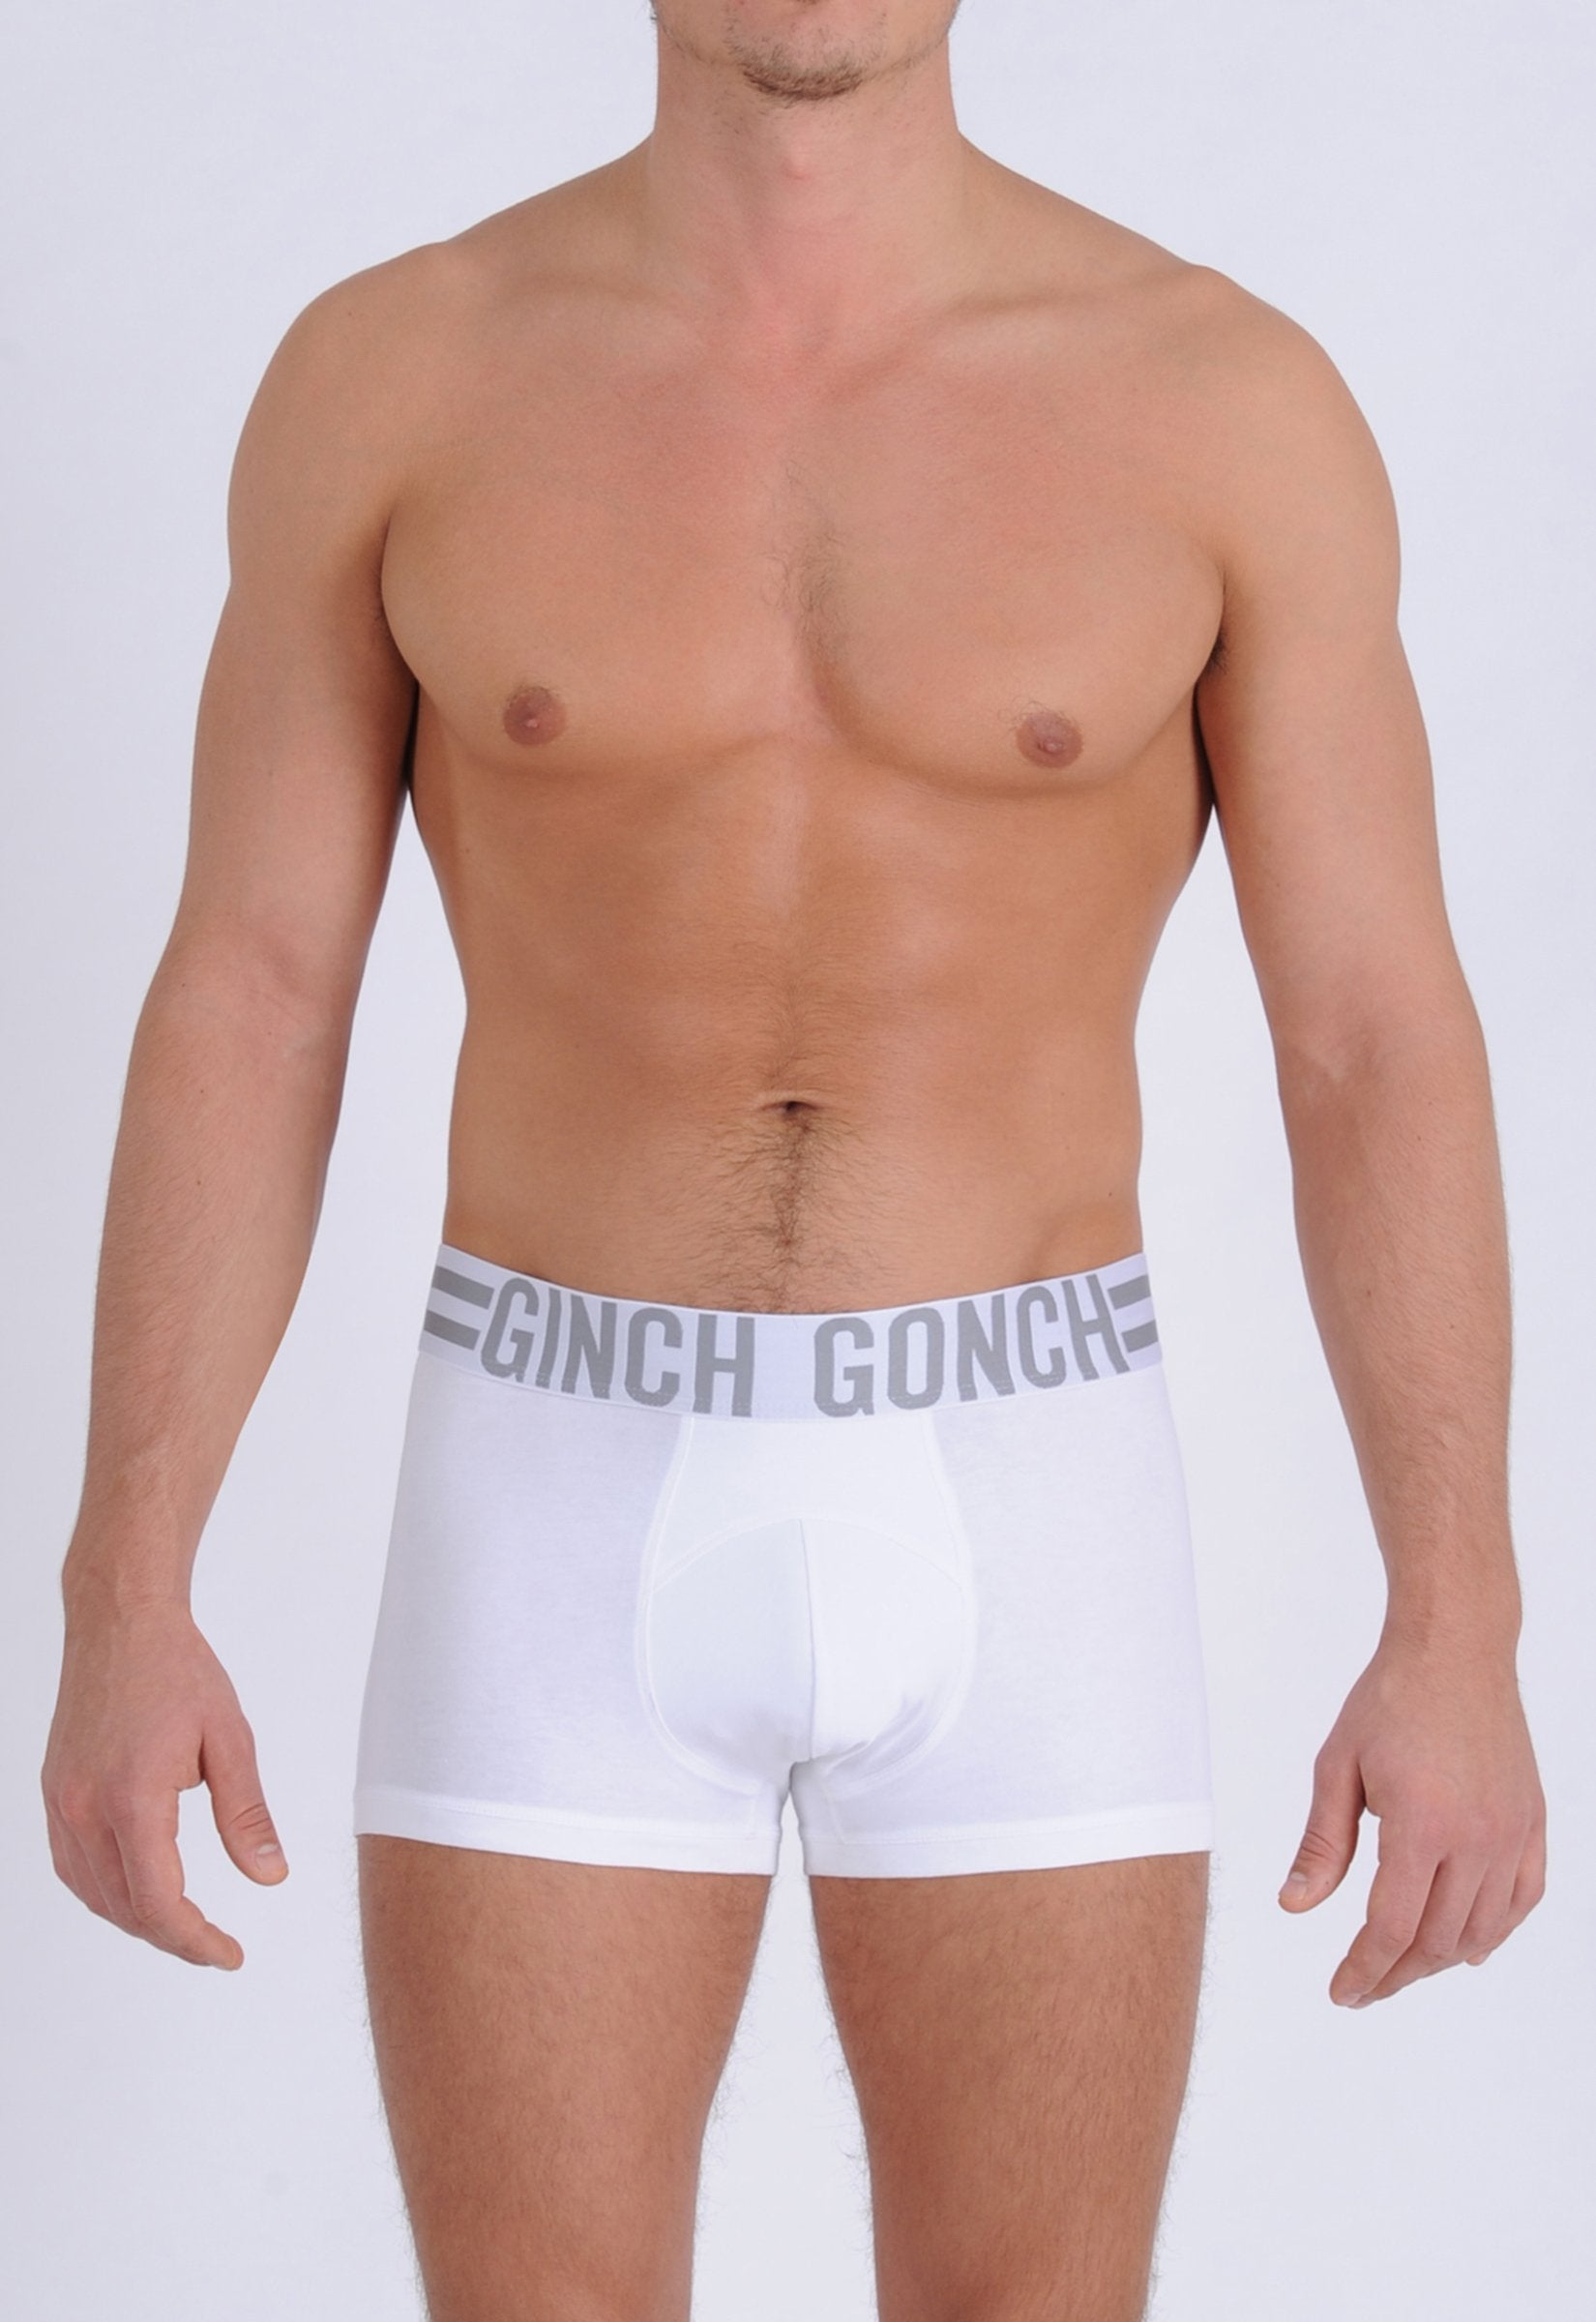 Ginch Gonch Signature Series - Trunk, short boxer brief - white men's underwear thick printed waistband front